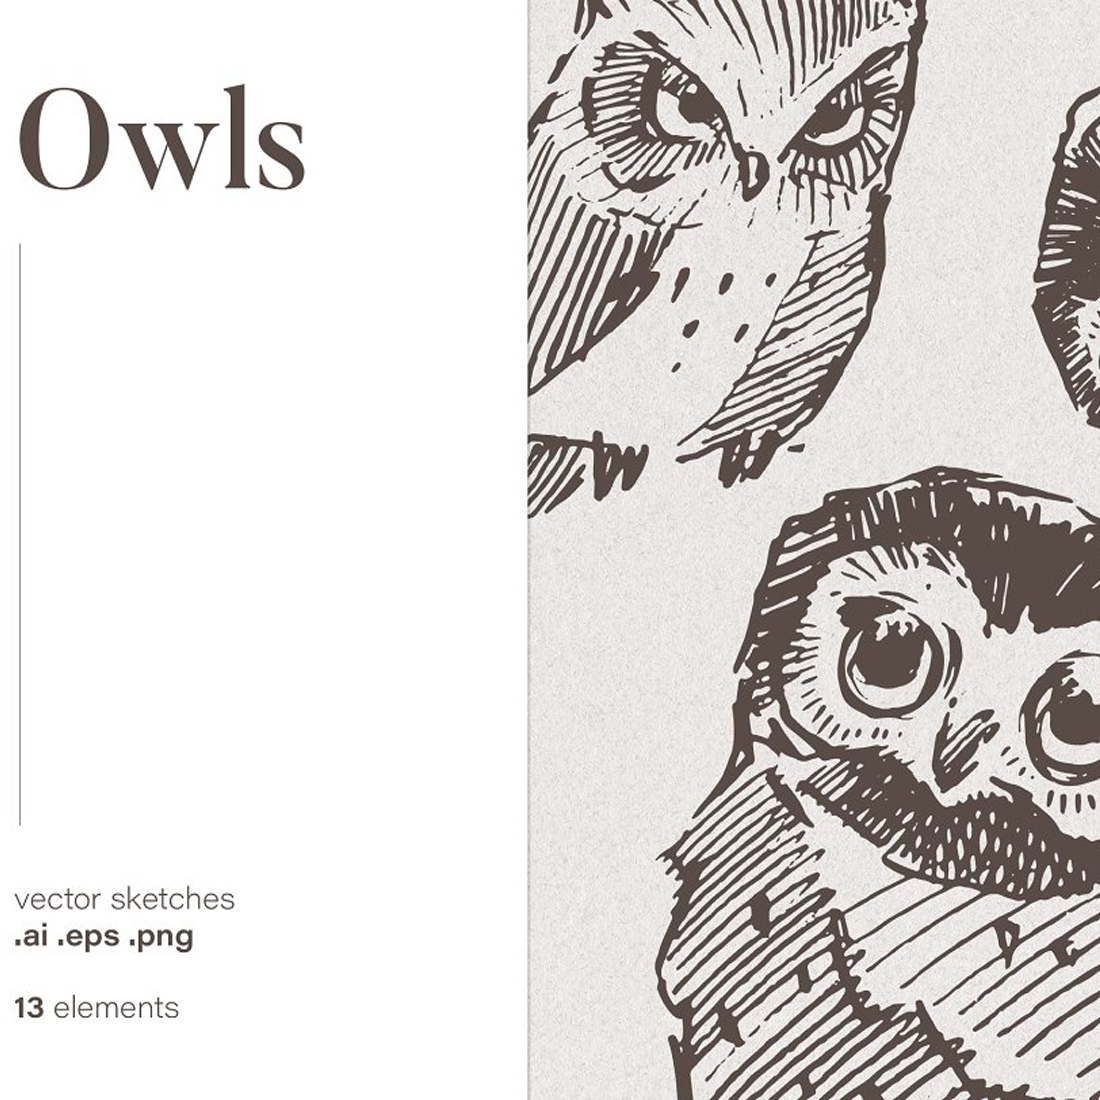 Images preview set of owl illustrations.